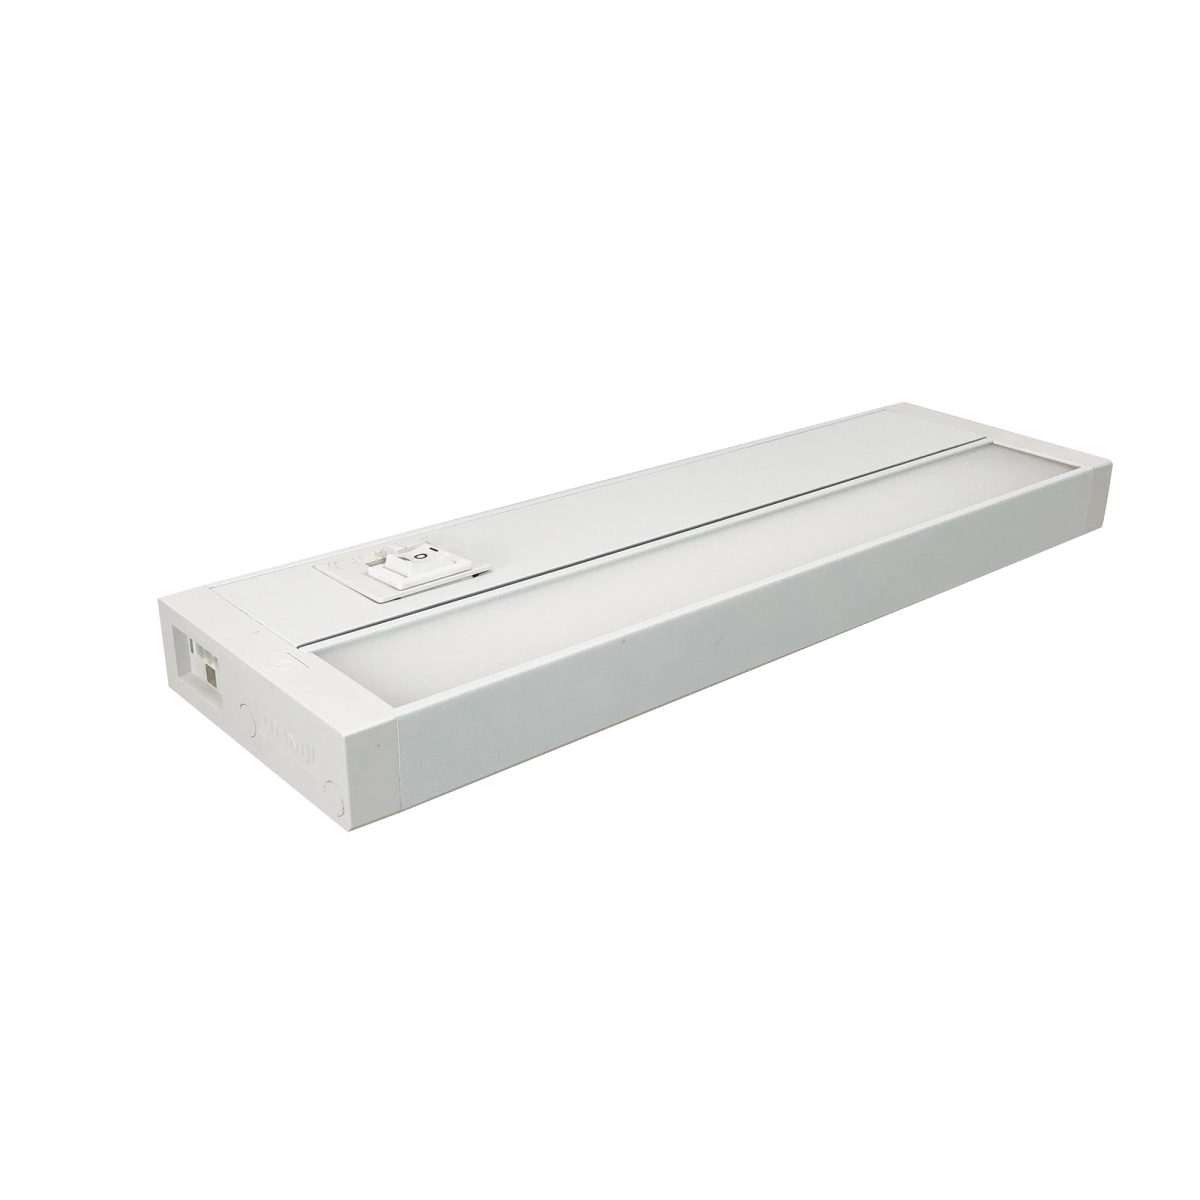 Picture of Nora Lighting NUDTW-8832-23345WH 32 in. Ledur Tunable White LED Undercabinet Light, White